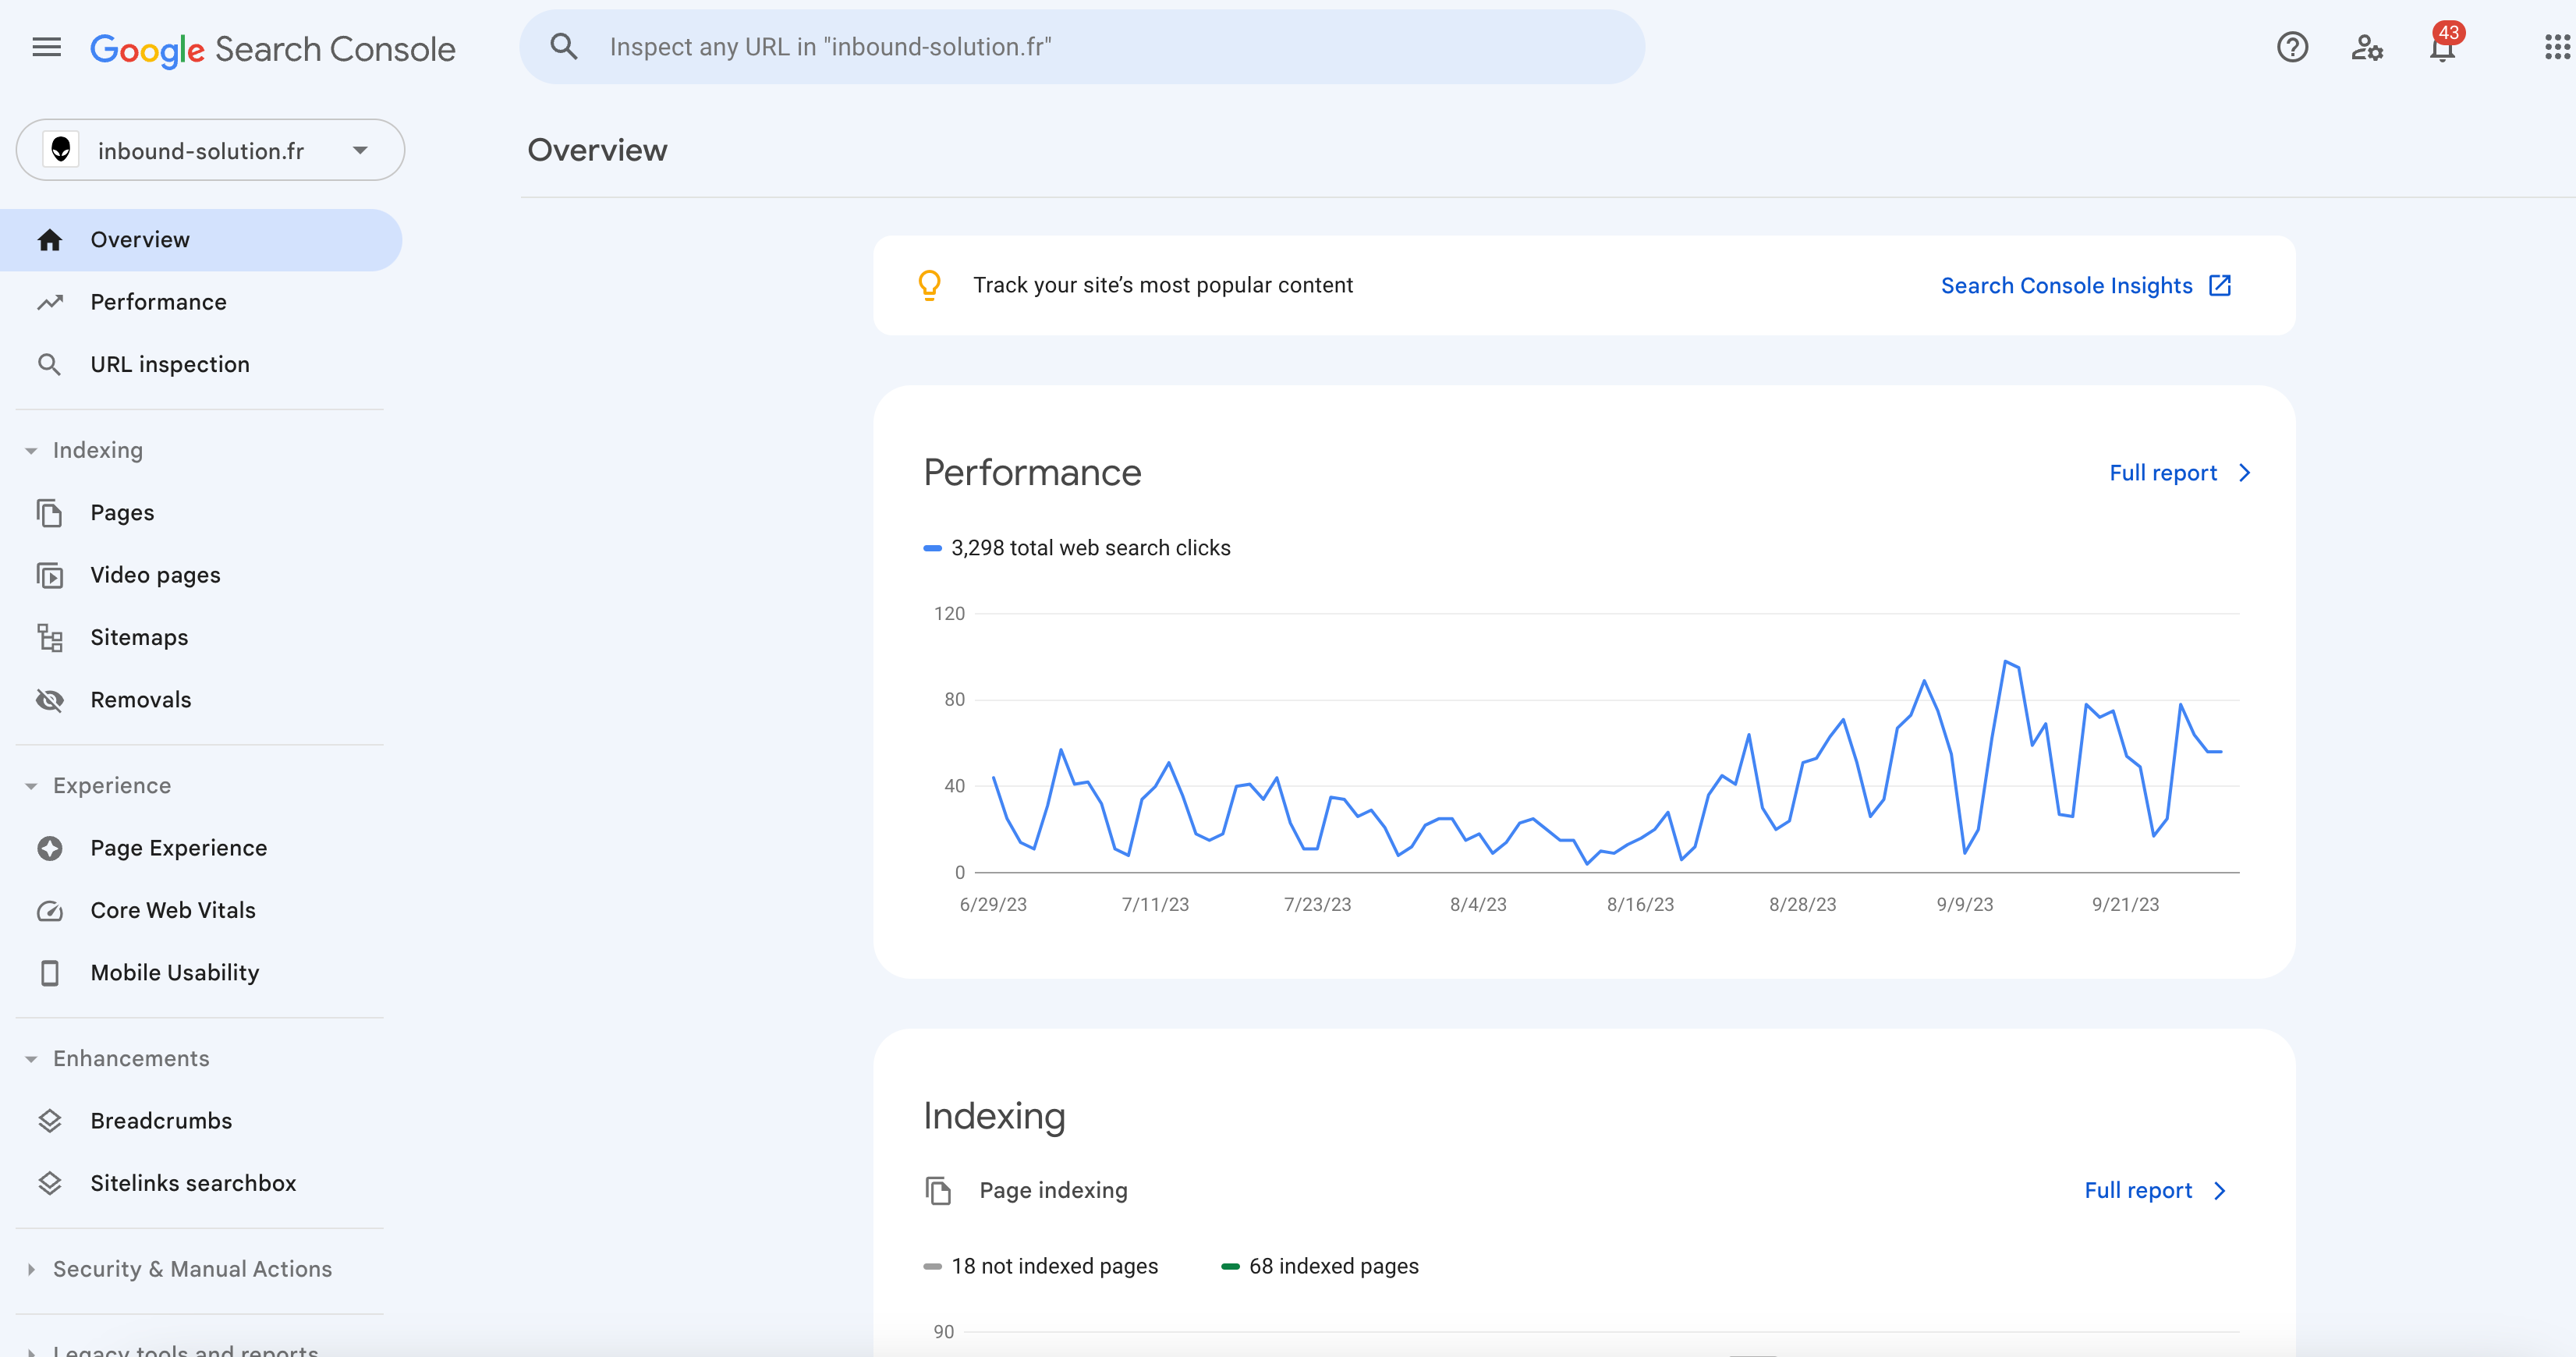 Interface Google Search Console